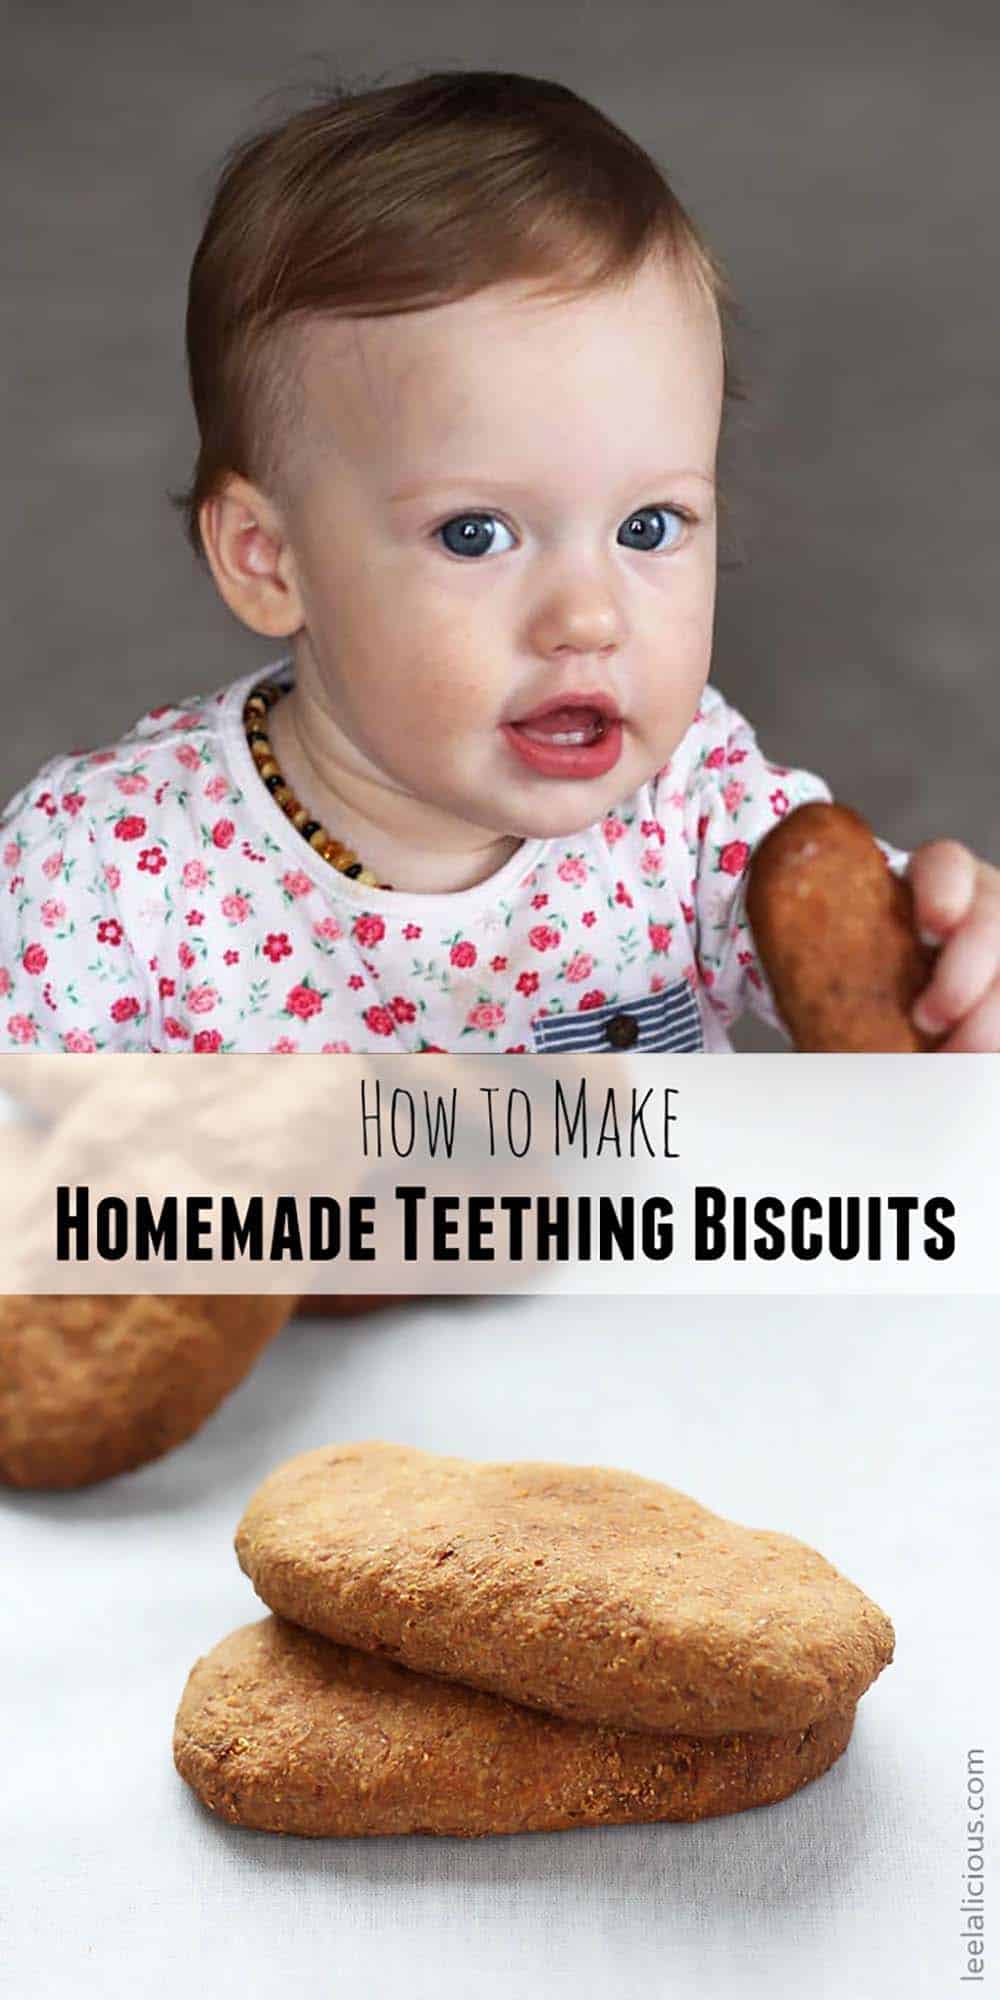 Homemade Teething Biscuits